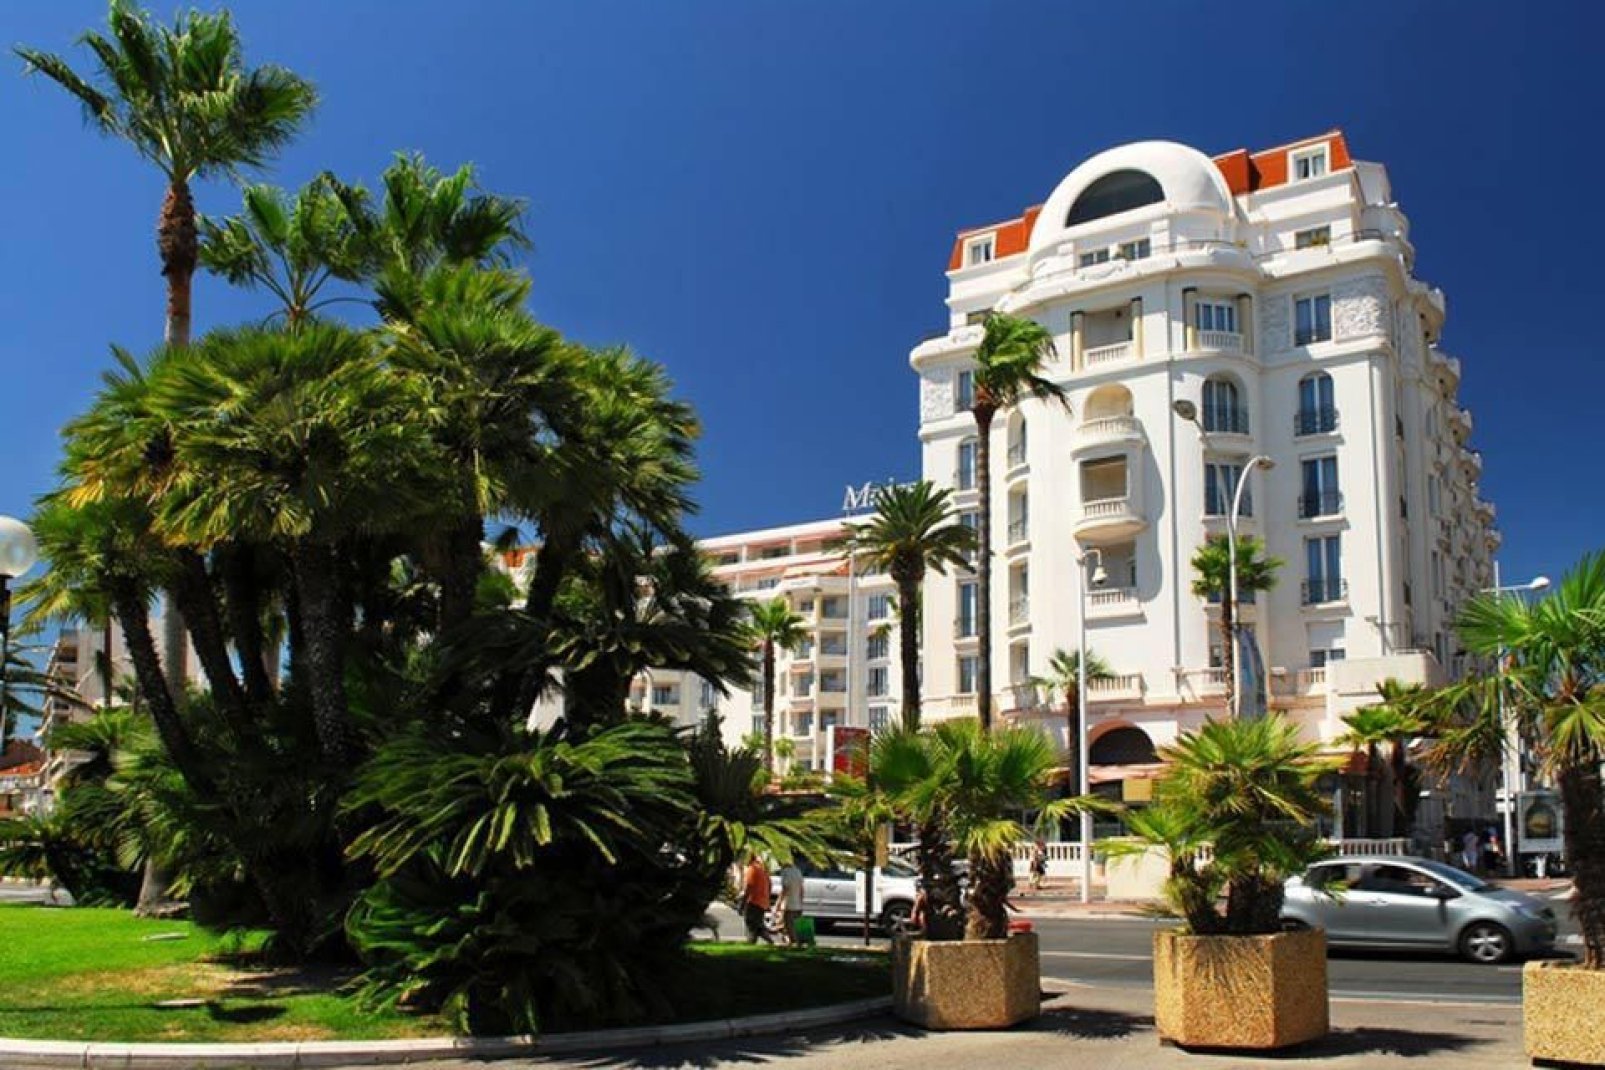 Renowned for its wealth and prestige, the city of Cannes is less superficial than it might initially appear.